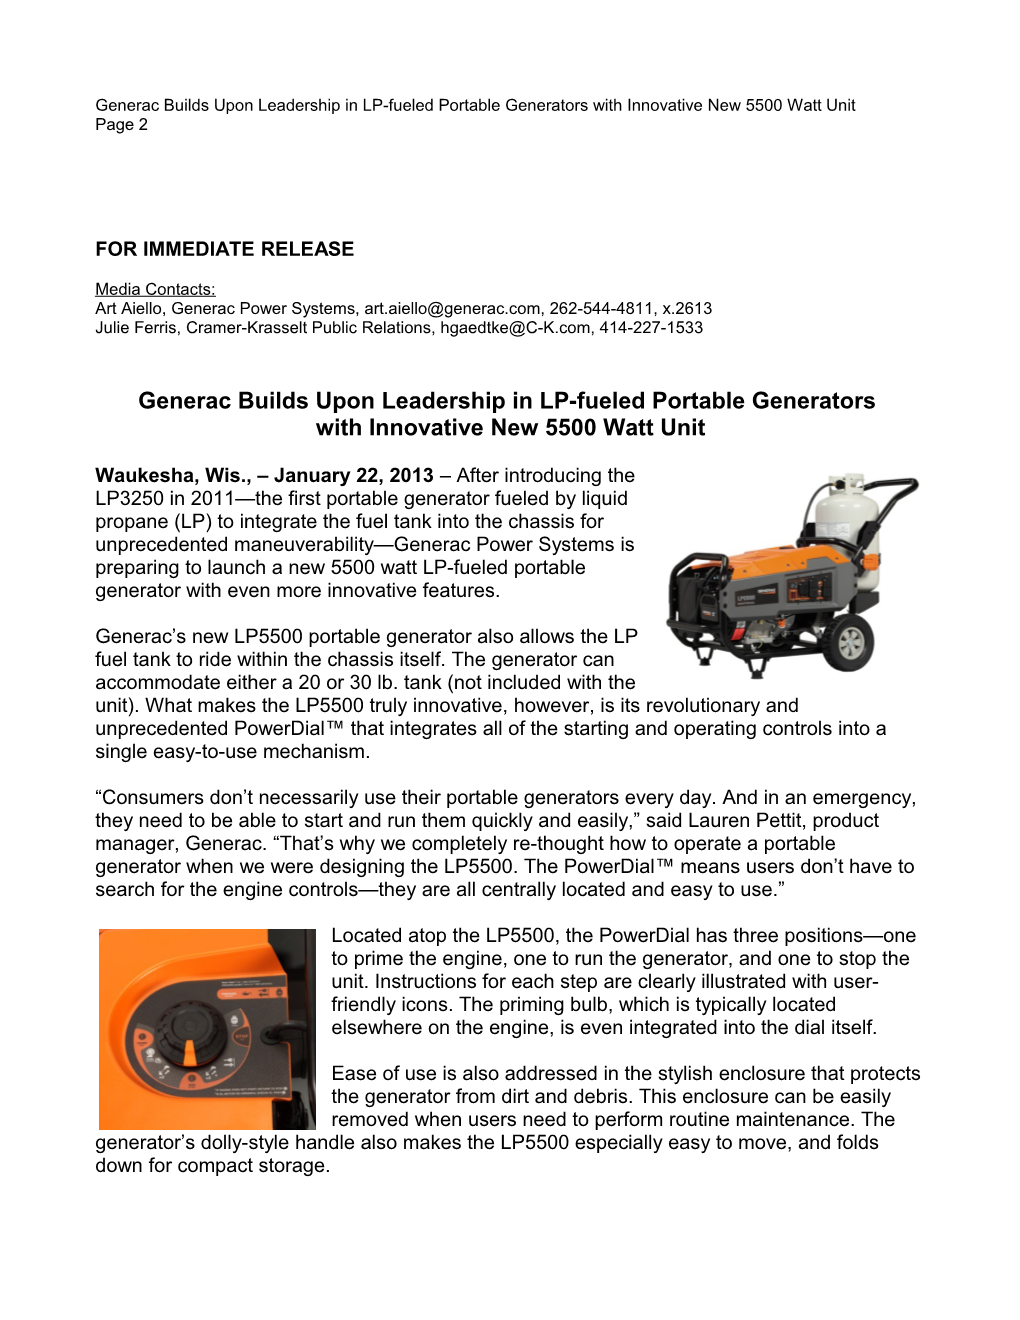 Generac Builds Upon Leadership in LP-Fueled Portable Generatorswith Innovative New 5500